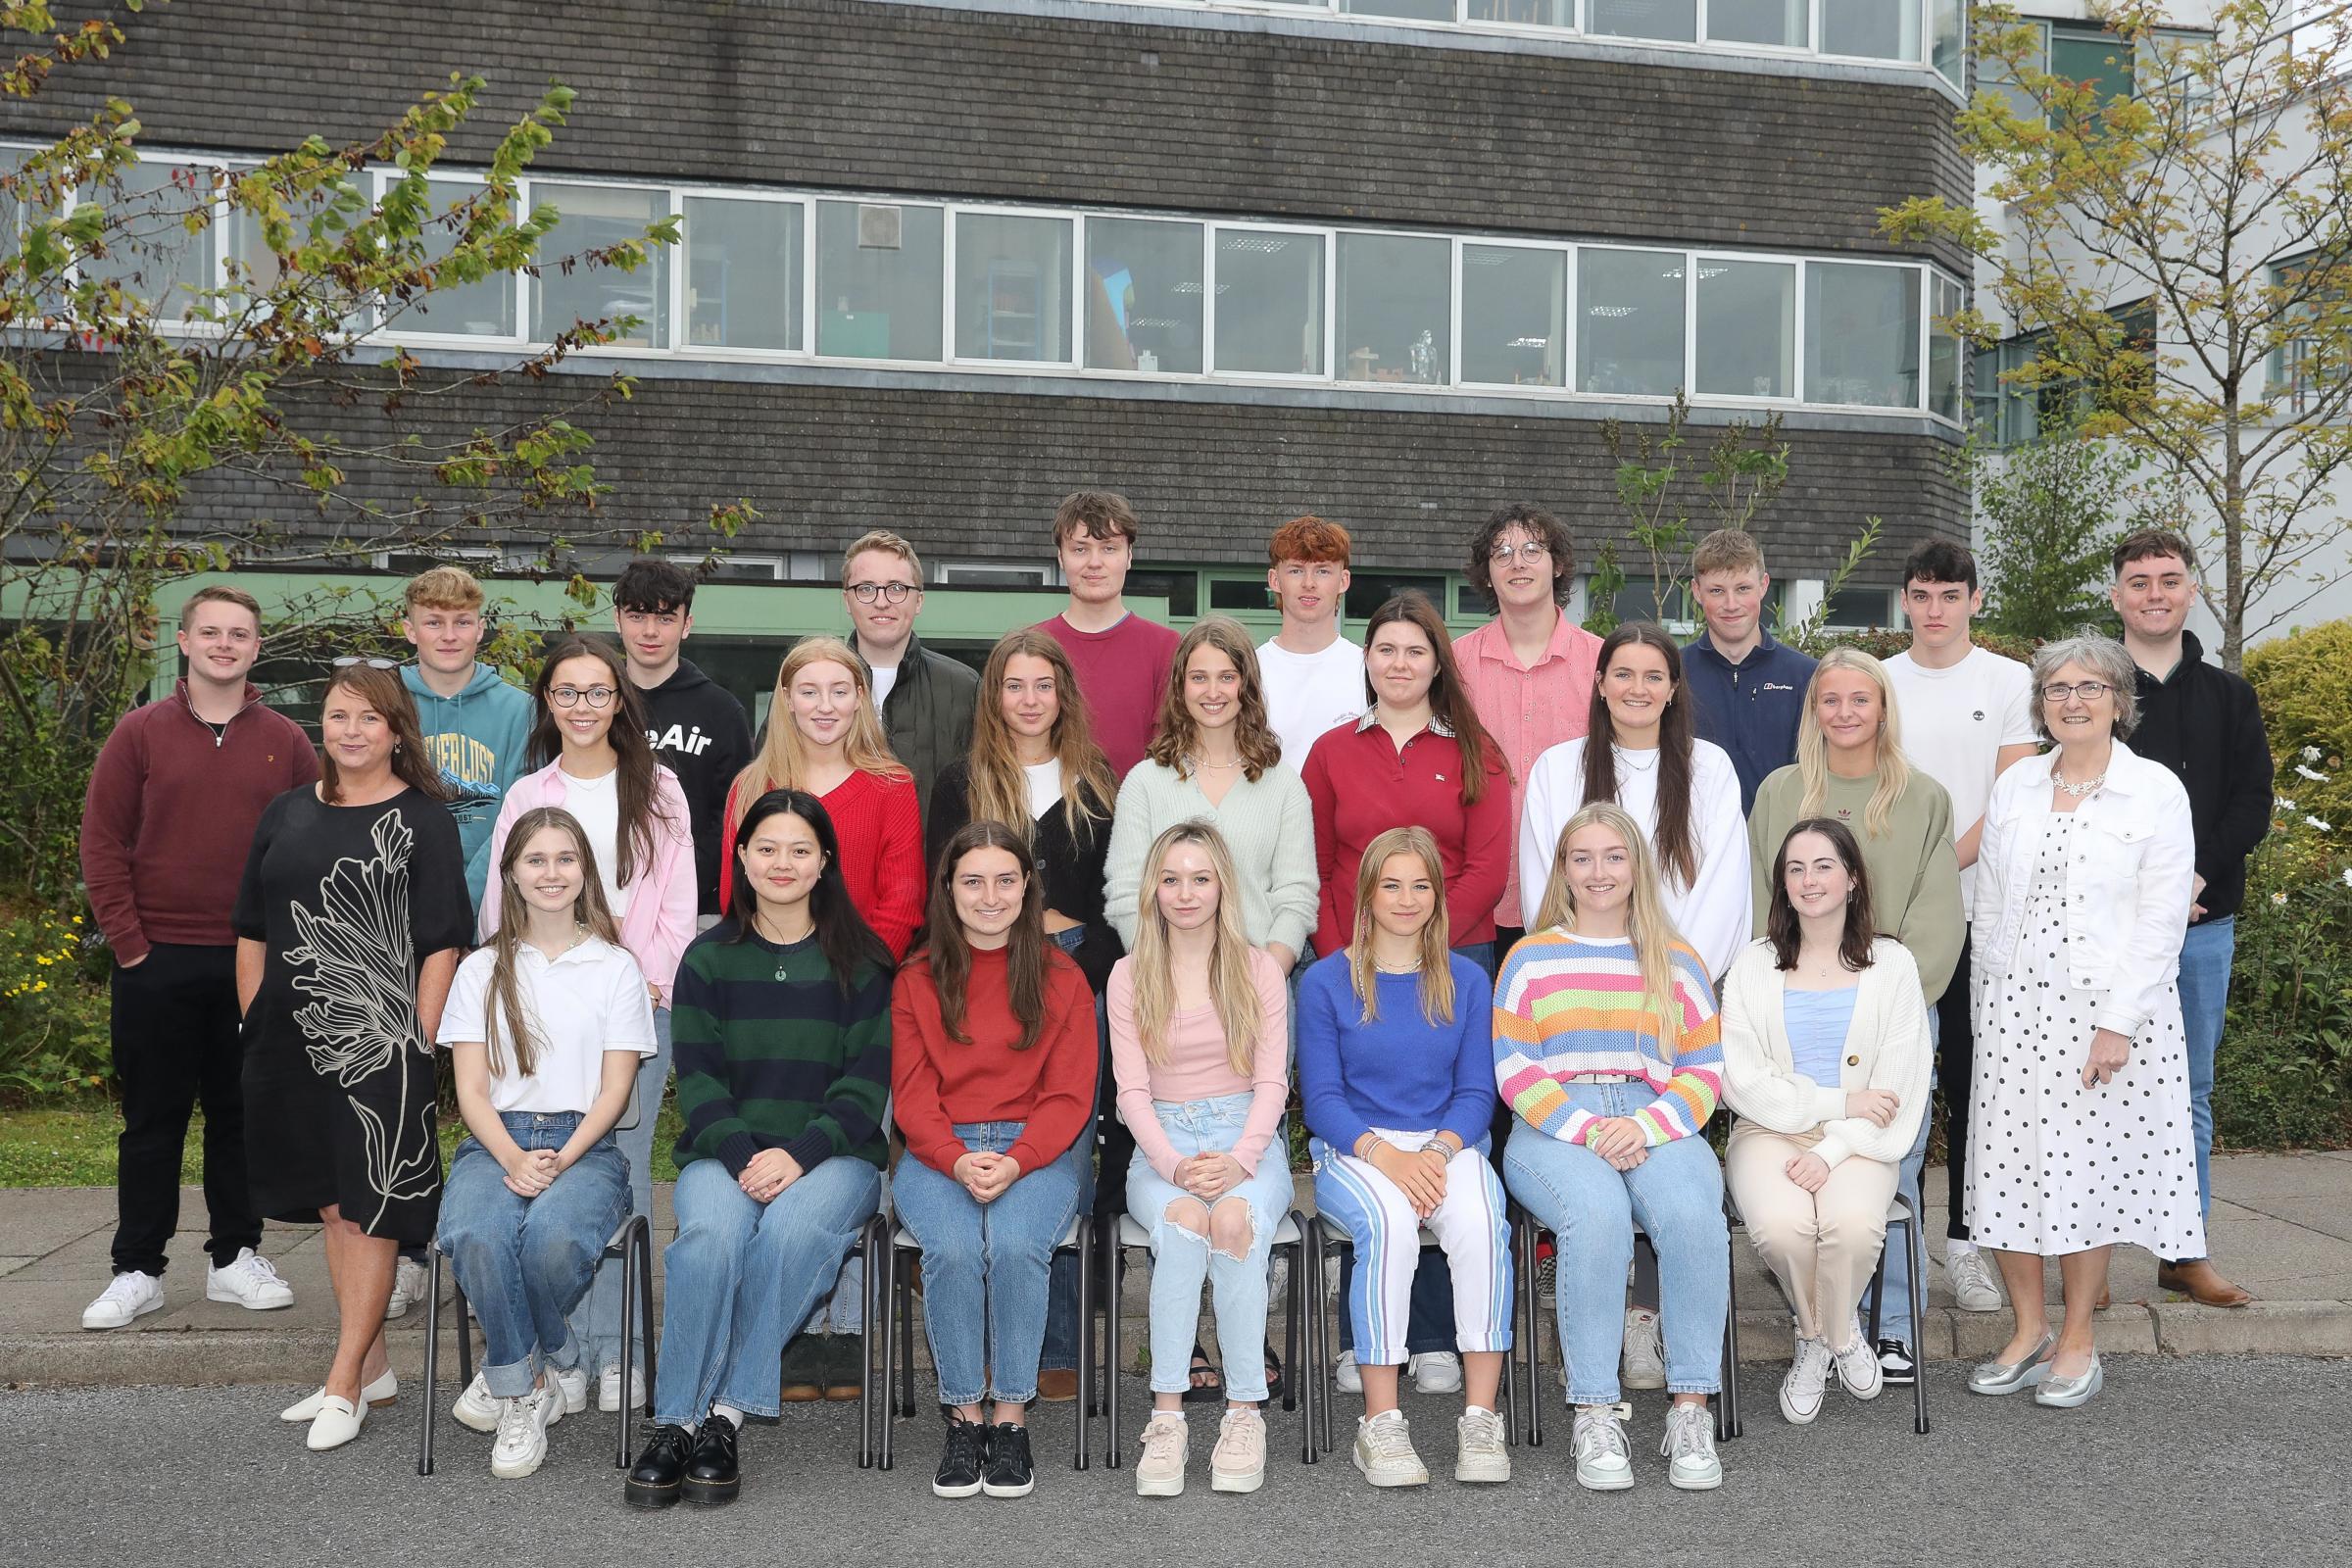 Enniskillen Royal Grammar School students receiving their A-Level results. Pictured front row, from left: Catherine Fleming, Angel Huang, Kayla Noble, Rachel Stewart, Olivia Williams, Emily Morton and Grace Farrell. Middle row, from left: Head of Careers